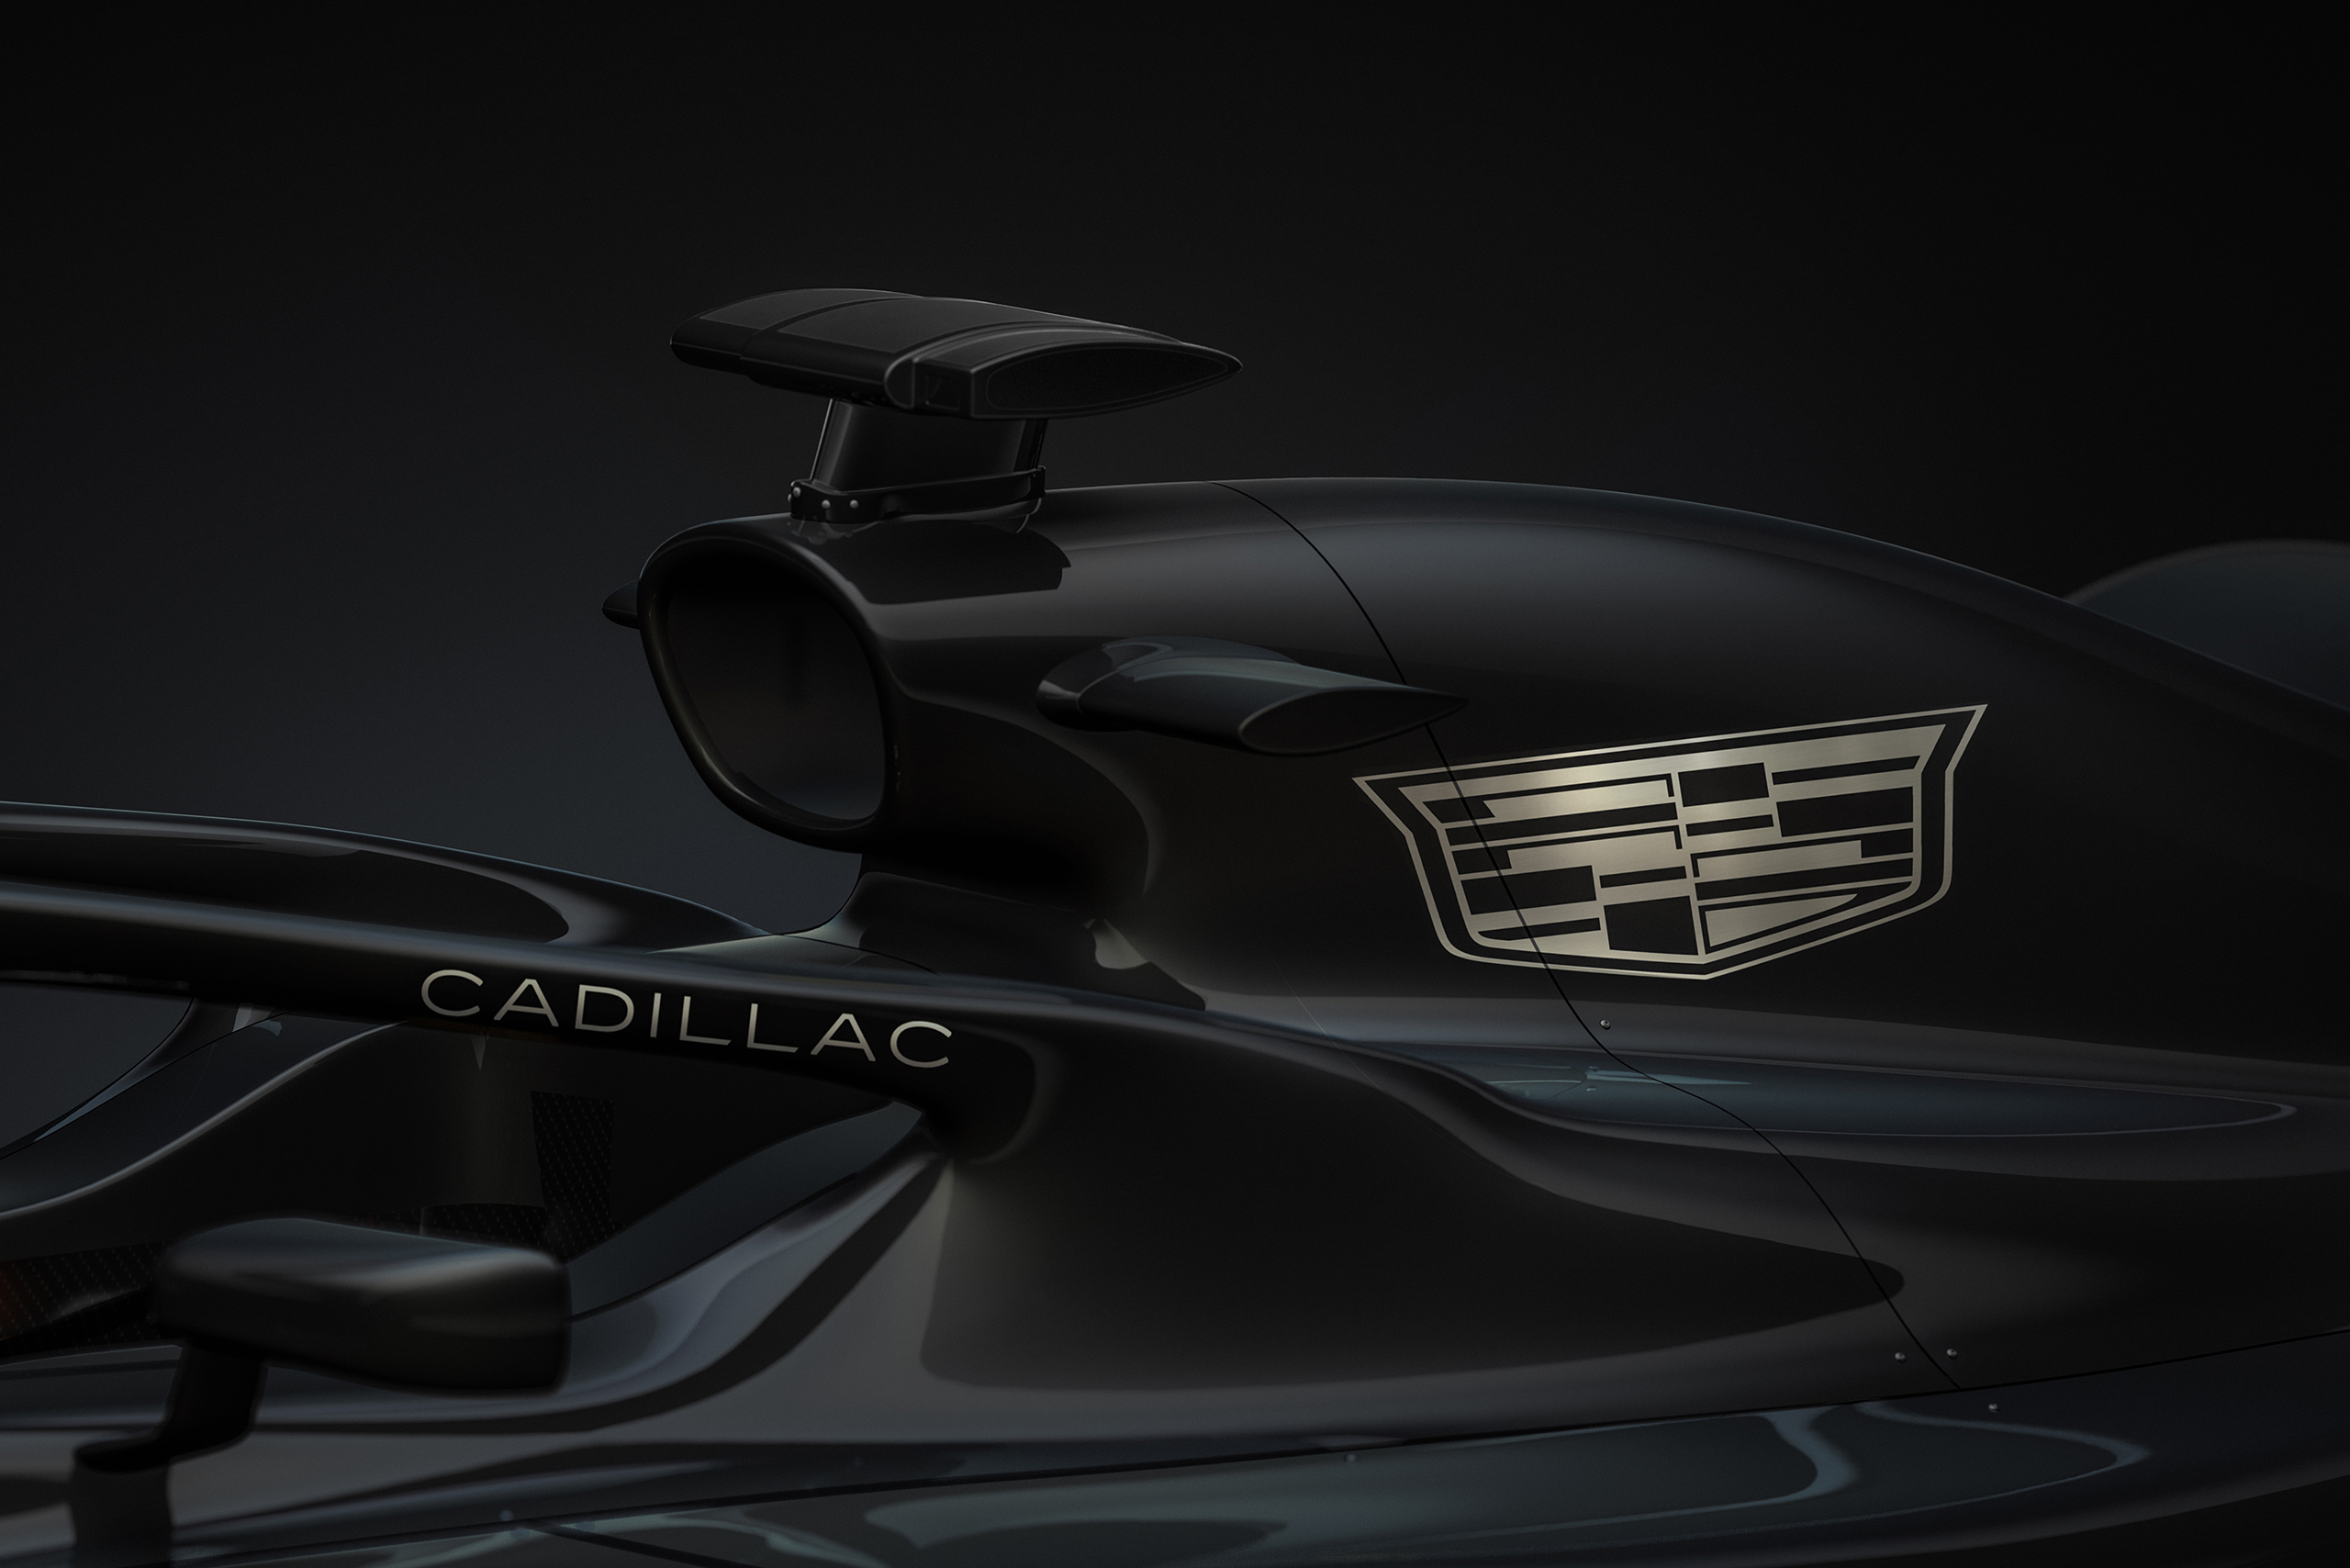 An image GM released alongside its announcement that it has formally registered as an F1 power unit supplier for the 2028 season.